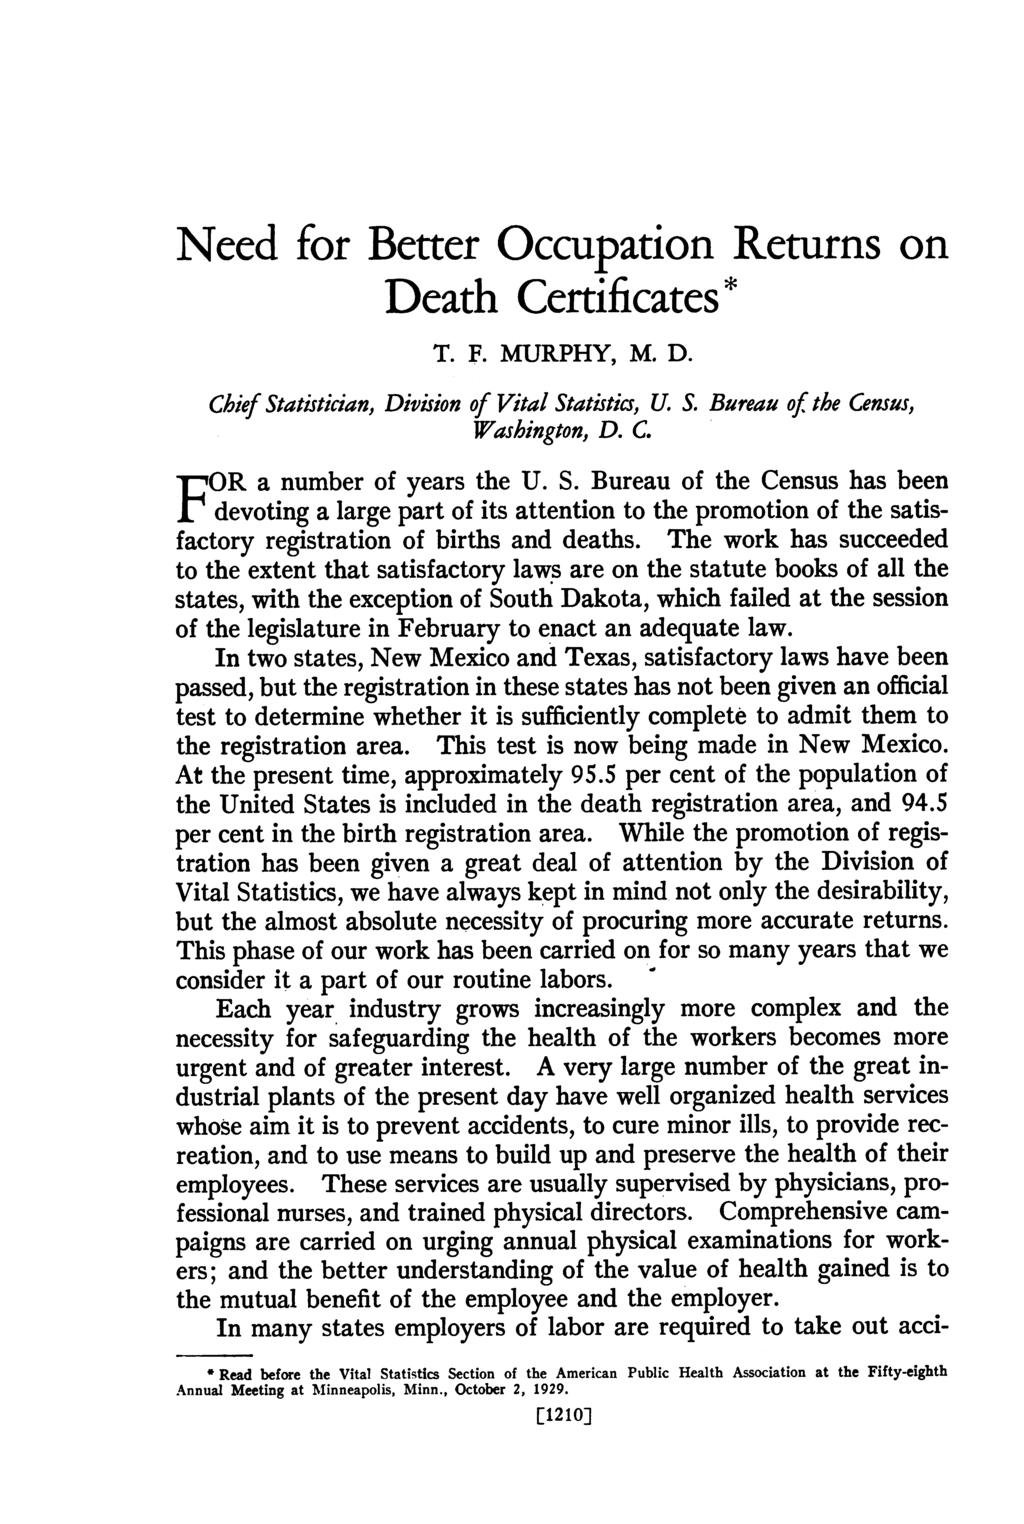 Need for Better Occupation Returns on Death Certificates* T. F. MURPHY, M. D. Chief Statistician, Division of Vital Statistics, U. S. Bureau of the Census, Washington, D. C. FOR a number of years the U.